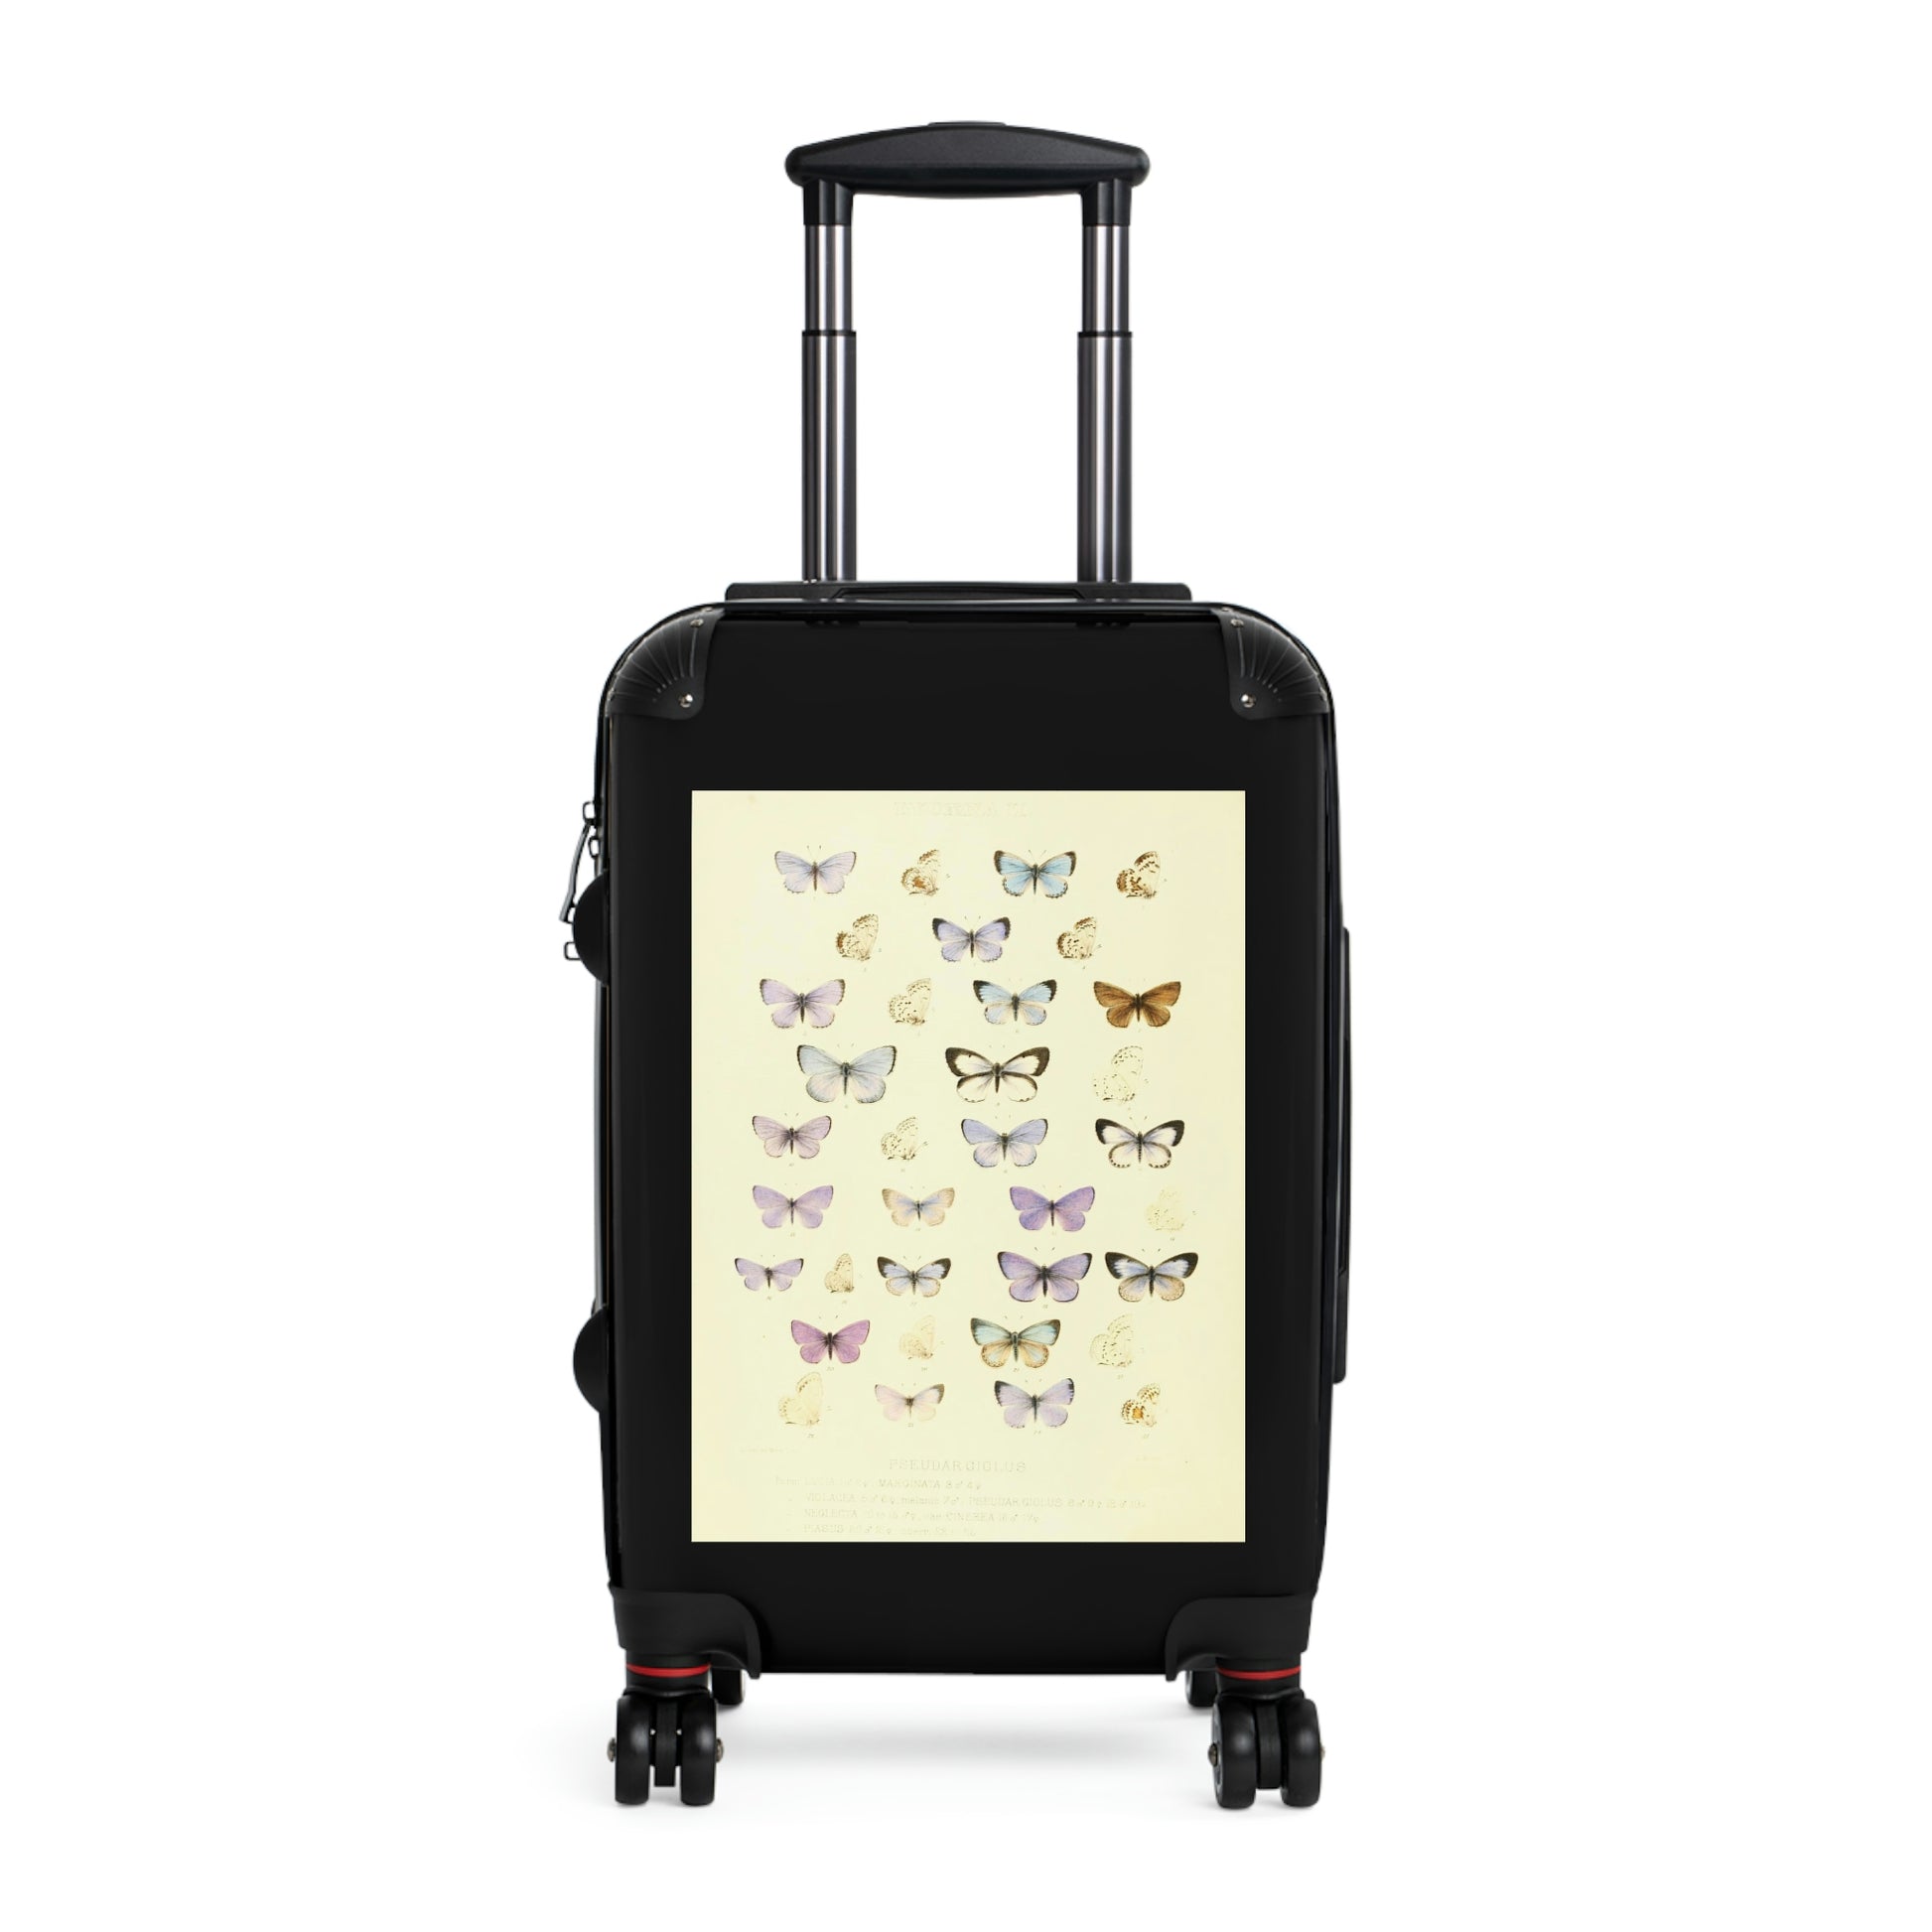 Getrott Butterflies of North America Lycæna Pseudargiolus Lucia Marginata Violocea Pseudar Giolus Neglecta Cinerea Piasus Aberr Cabin Suitcase Carry-On Travel Check Luggage 4-Wheel Spinner Suitcase Bag Multiple Colors and Sizes-Bags-Geotrott